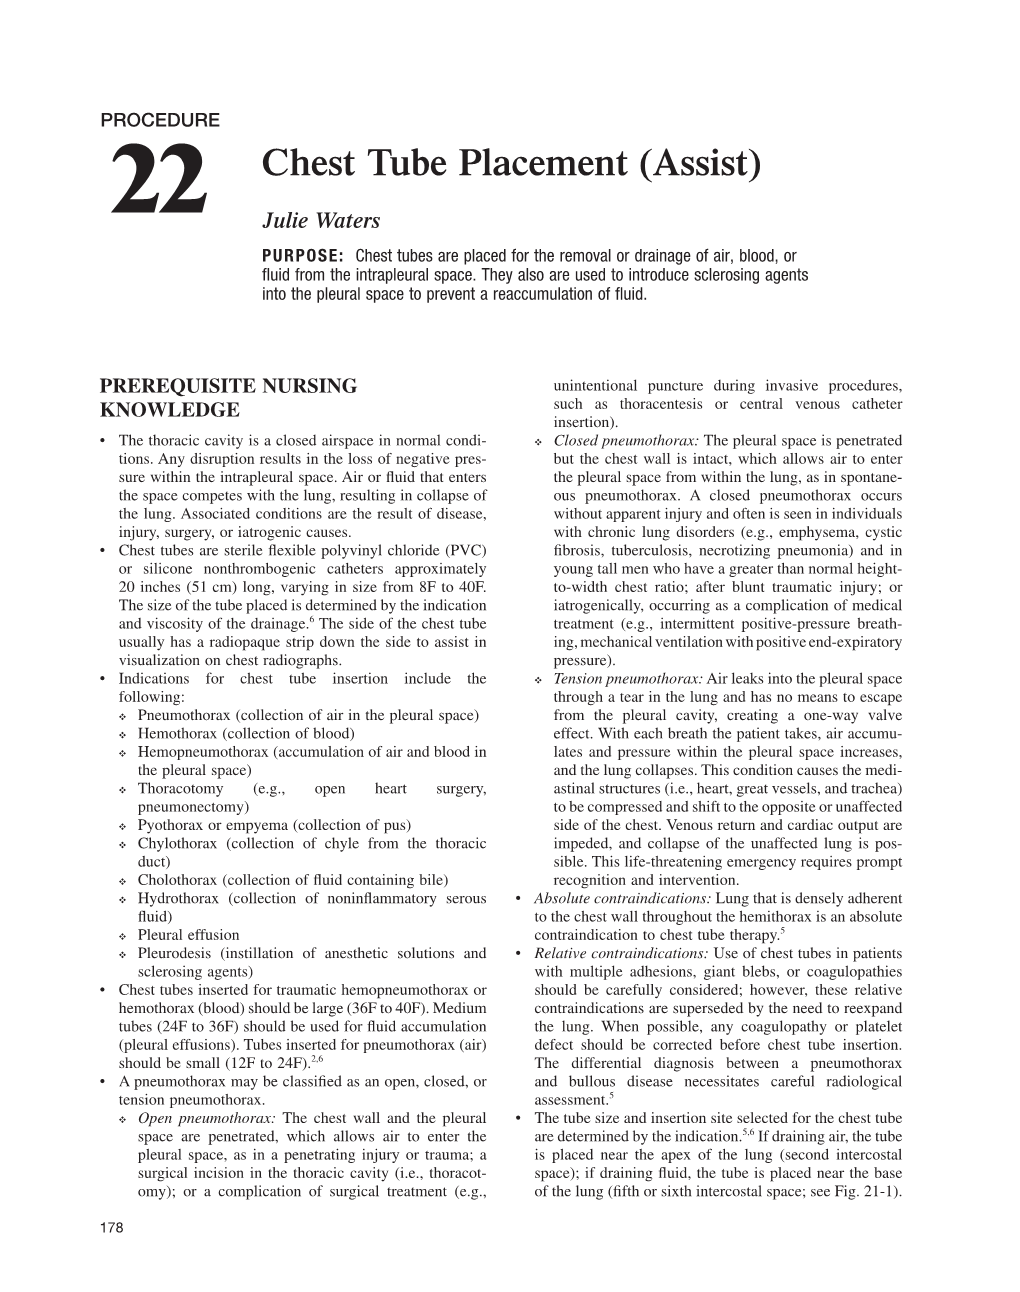 22 Chest Tube Placement (Assist) 179